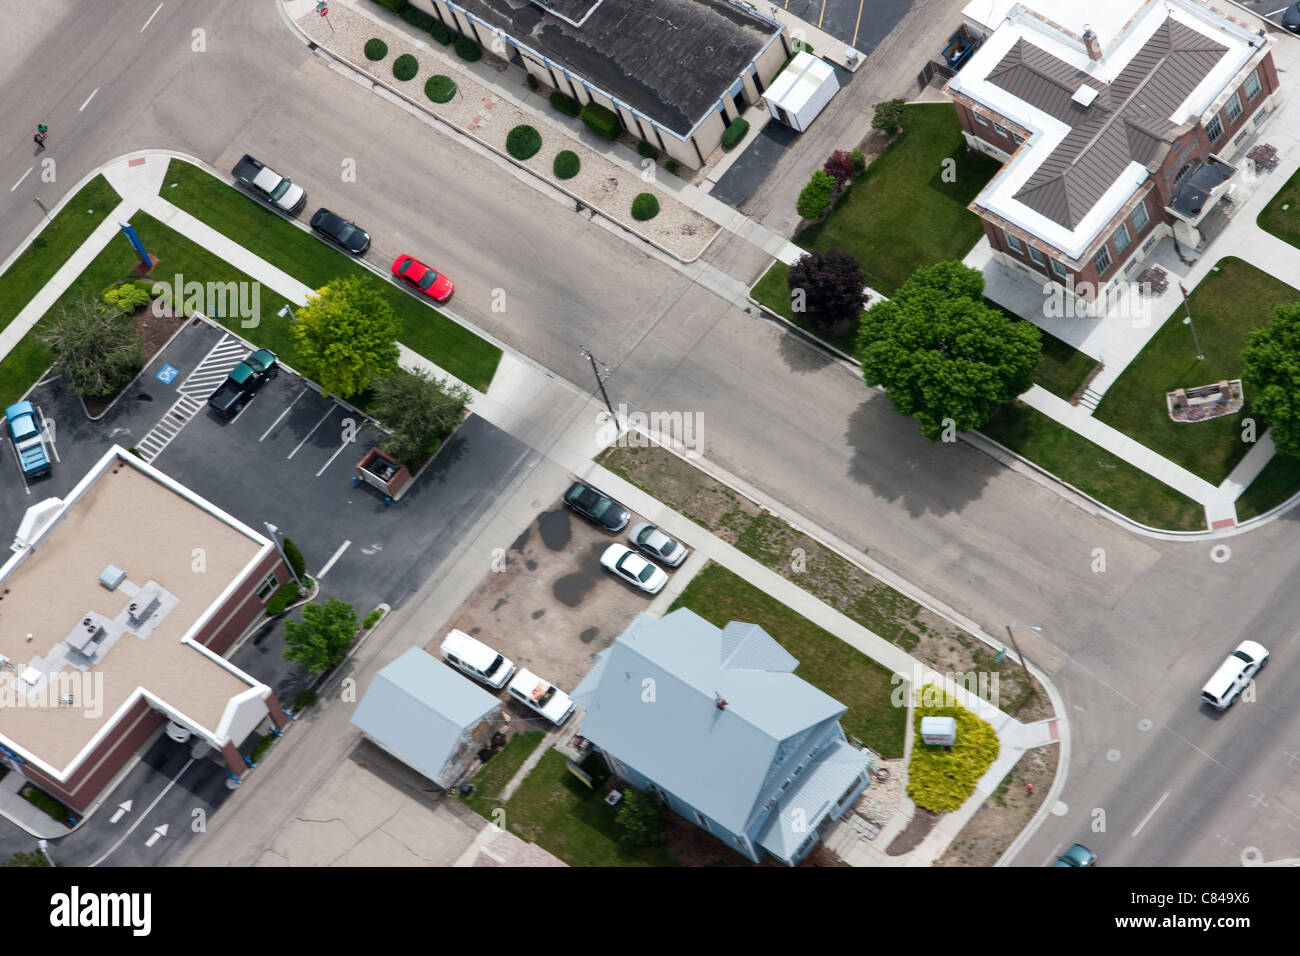 Aerial view of town roads and buildings Stock Photo